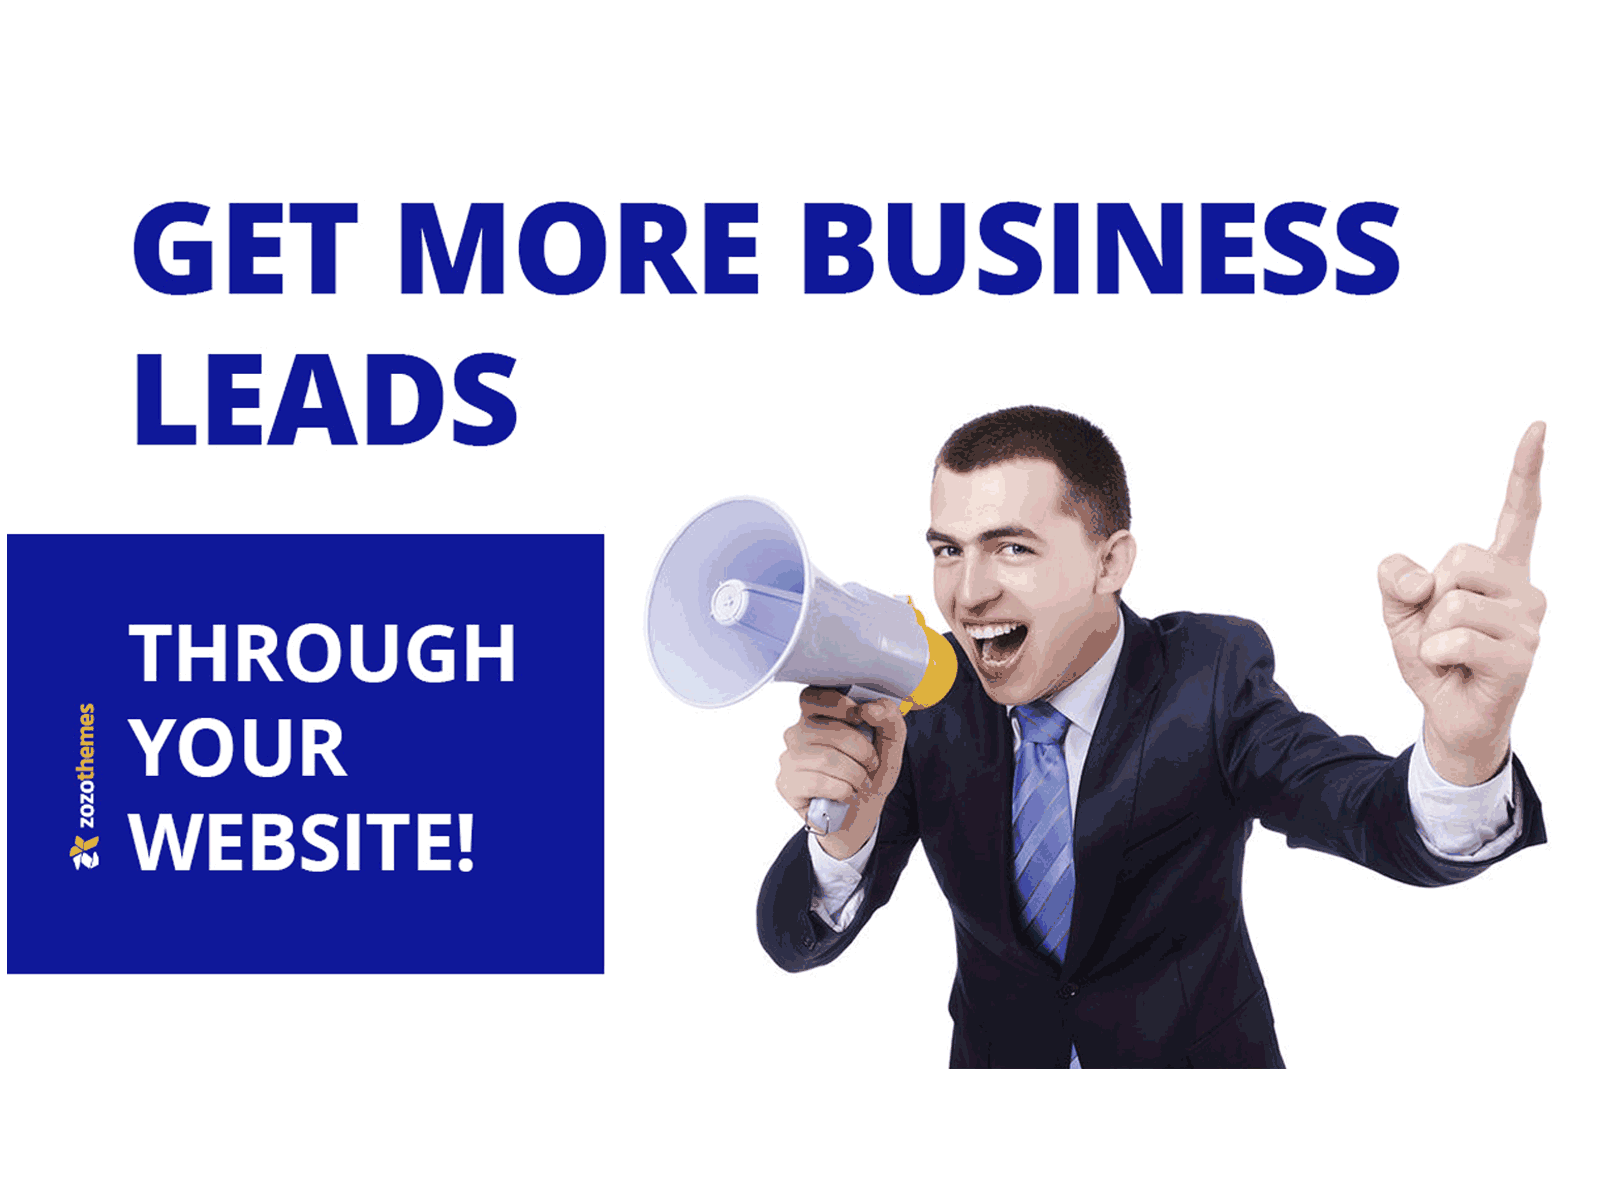 Get More Business Leads